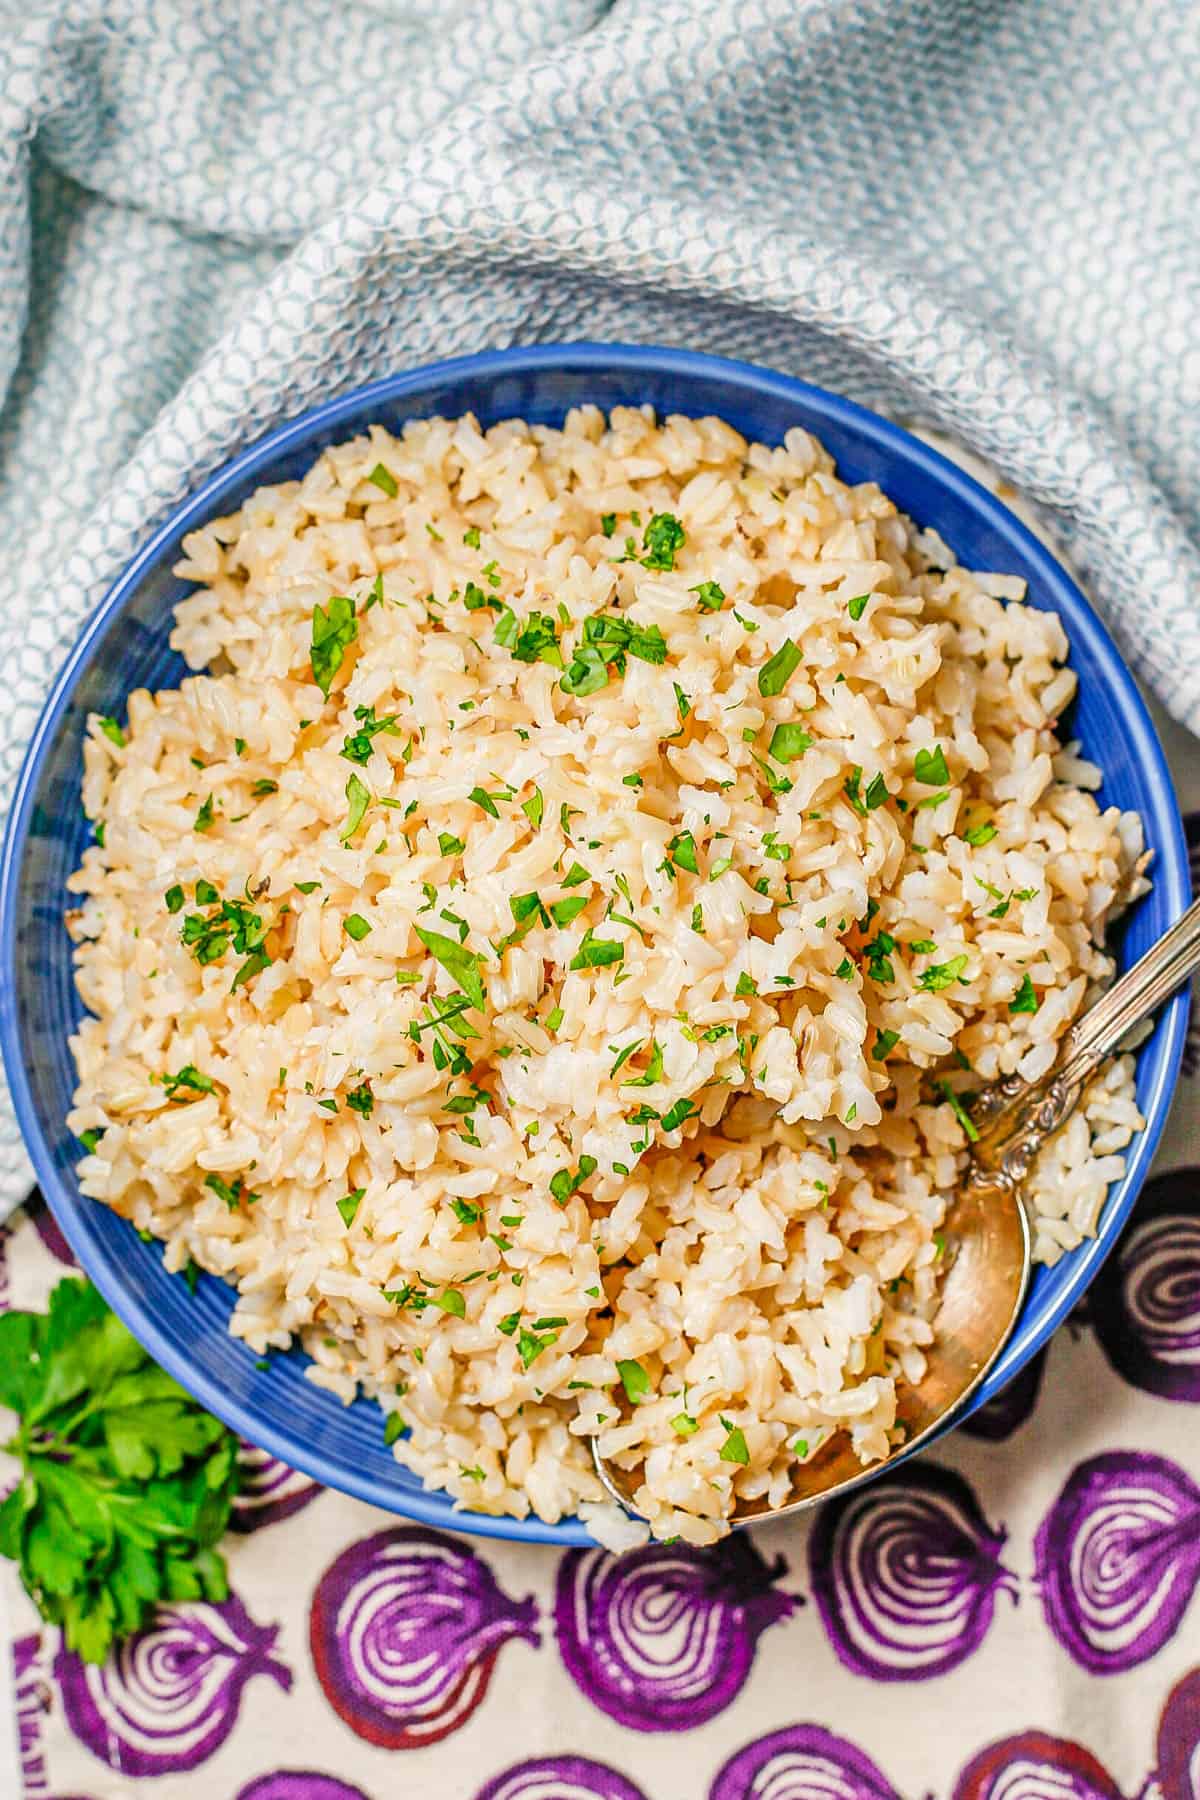 A spoon resting in a blue bowl of fluffy steamed brown rice with chopped fresh parsley on top.